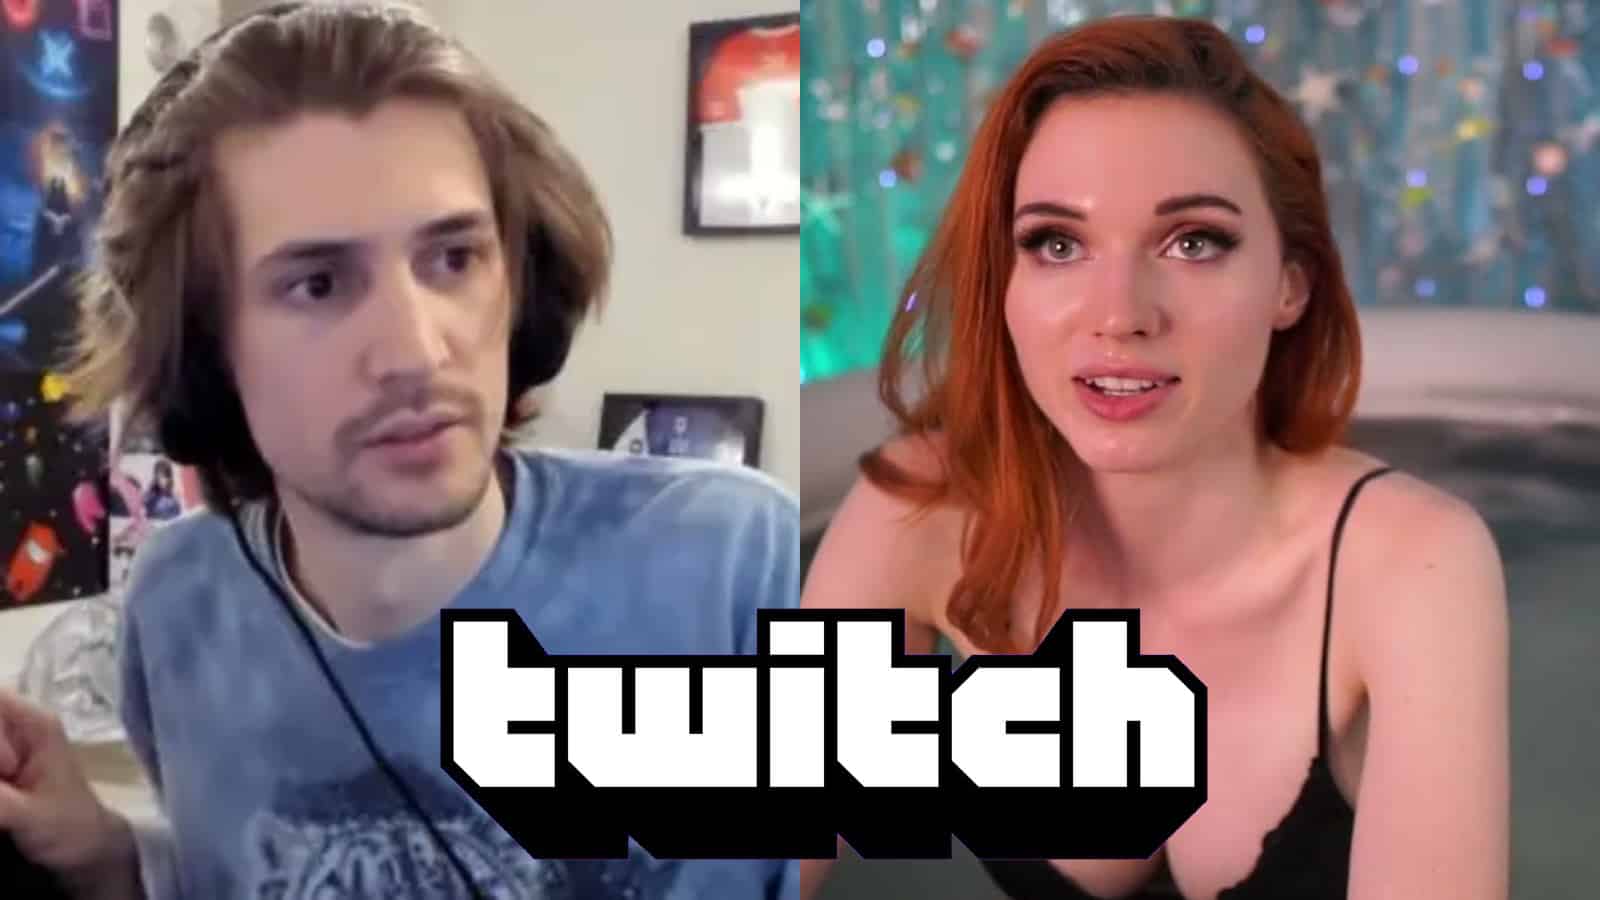 Amouranth calls out xqc for gambling streams amid hot tub meta